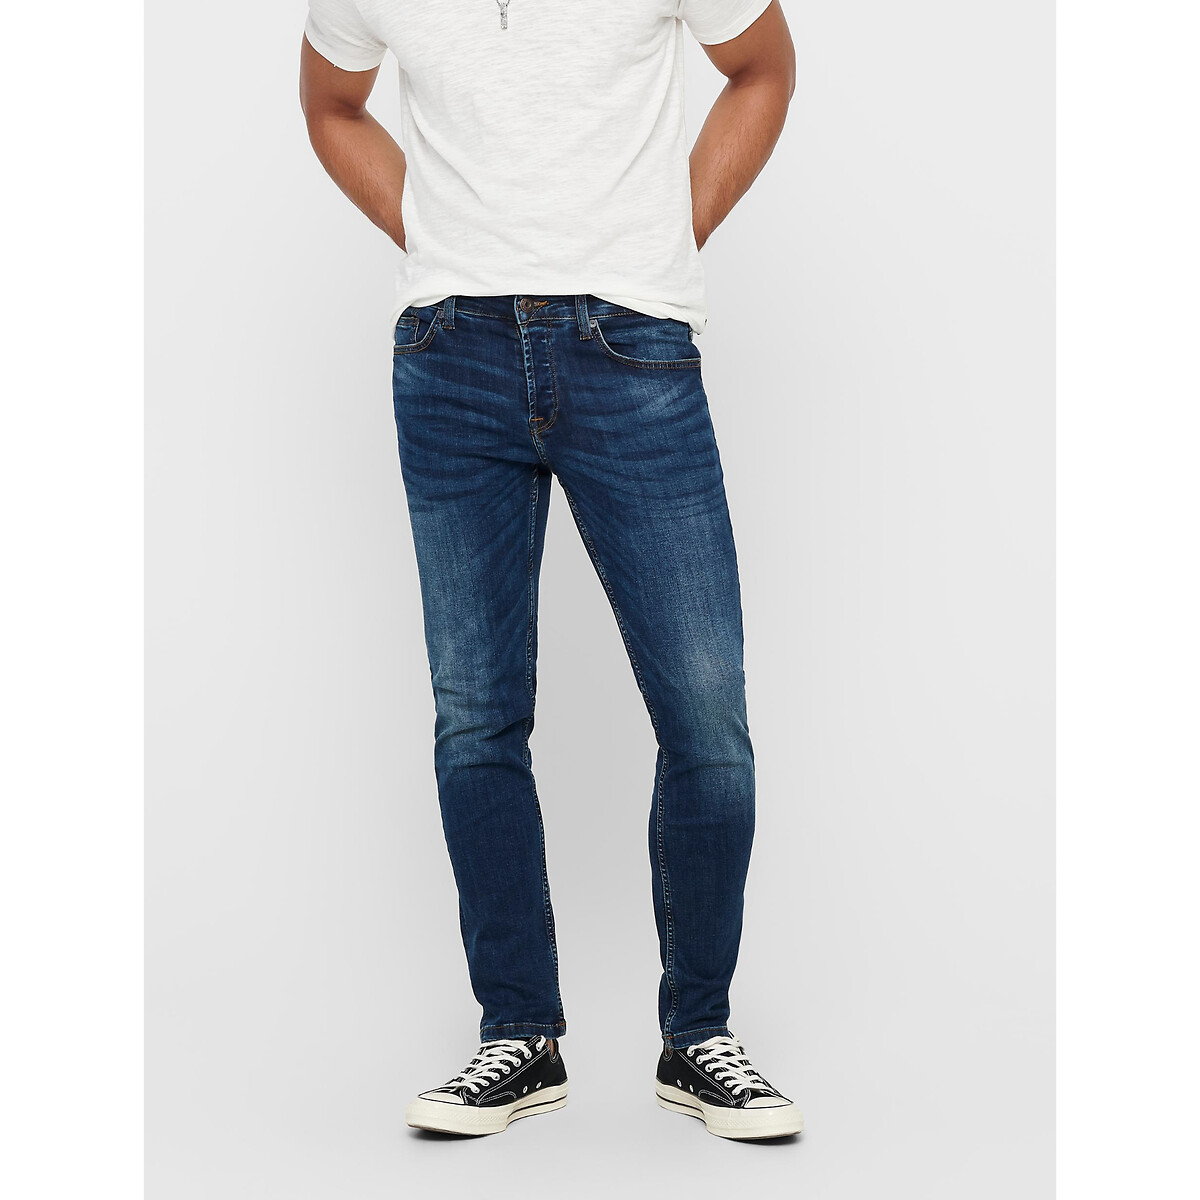 Weft Straight Stretch Jeans, Mid Rise